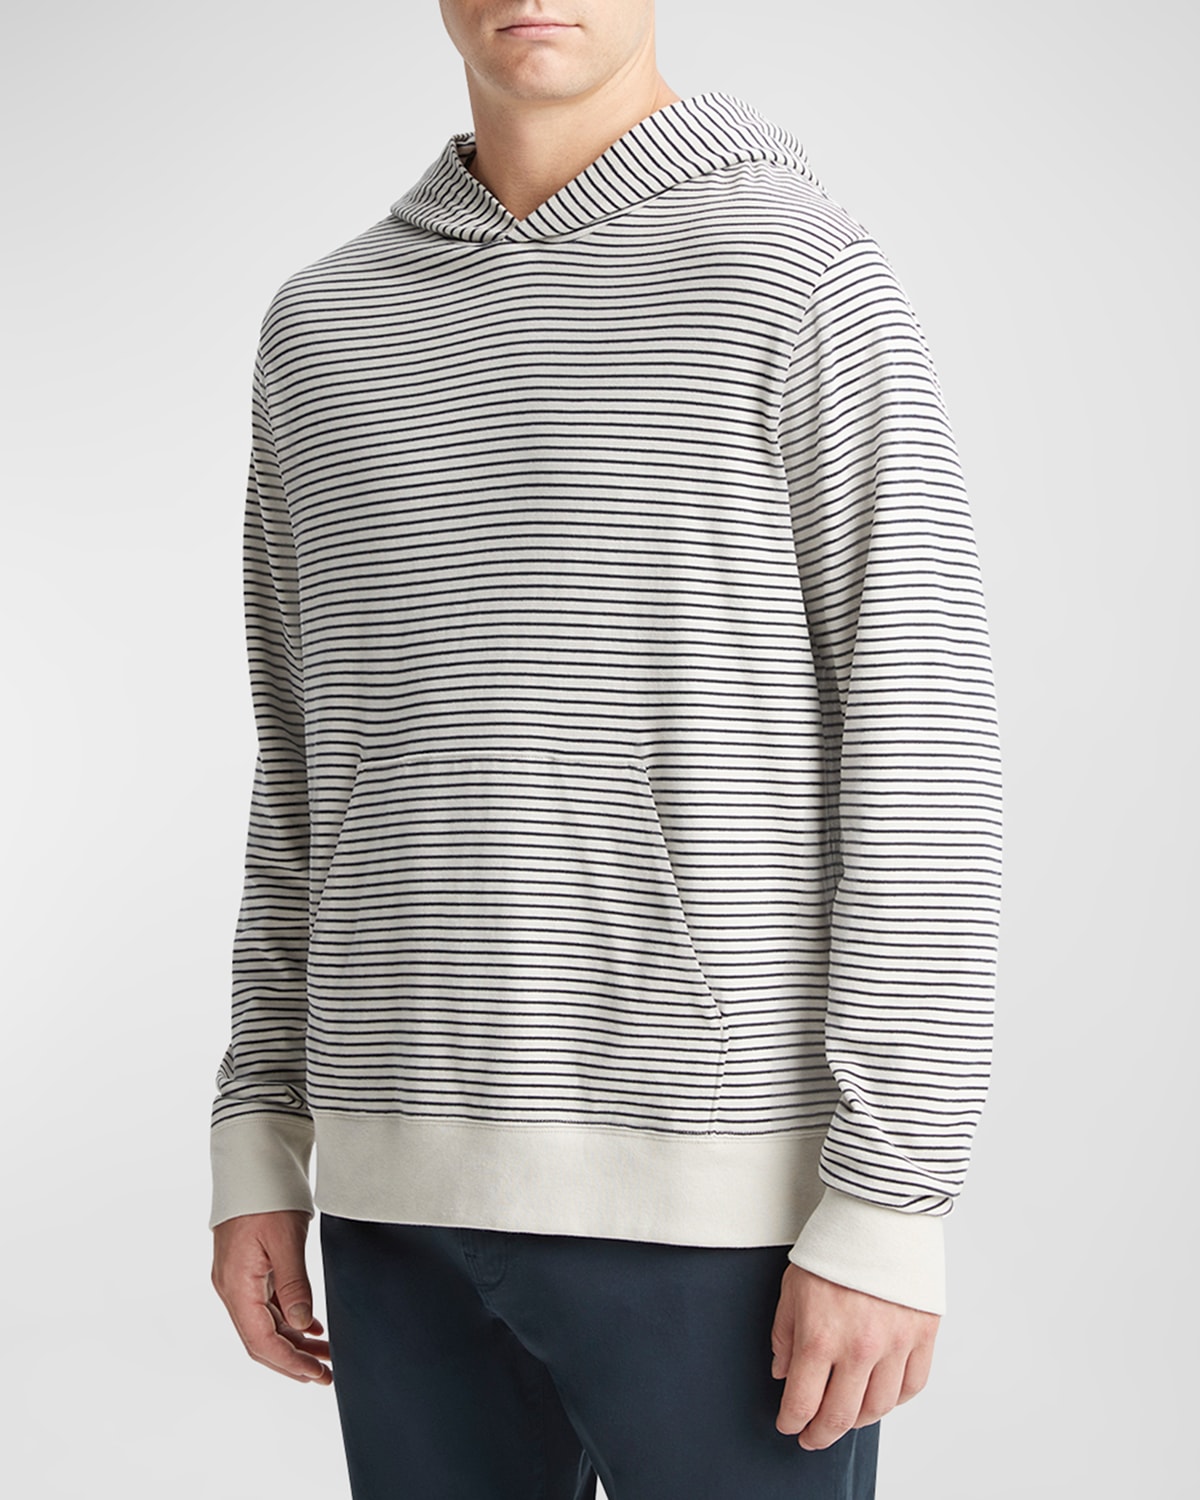 VINCE MEN'S SUEDED JERSEY STRIPED HOODIE